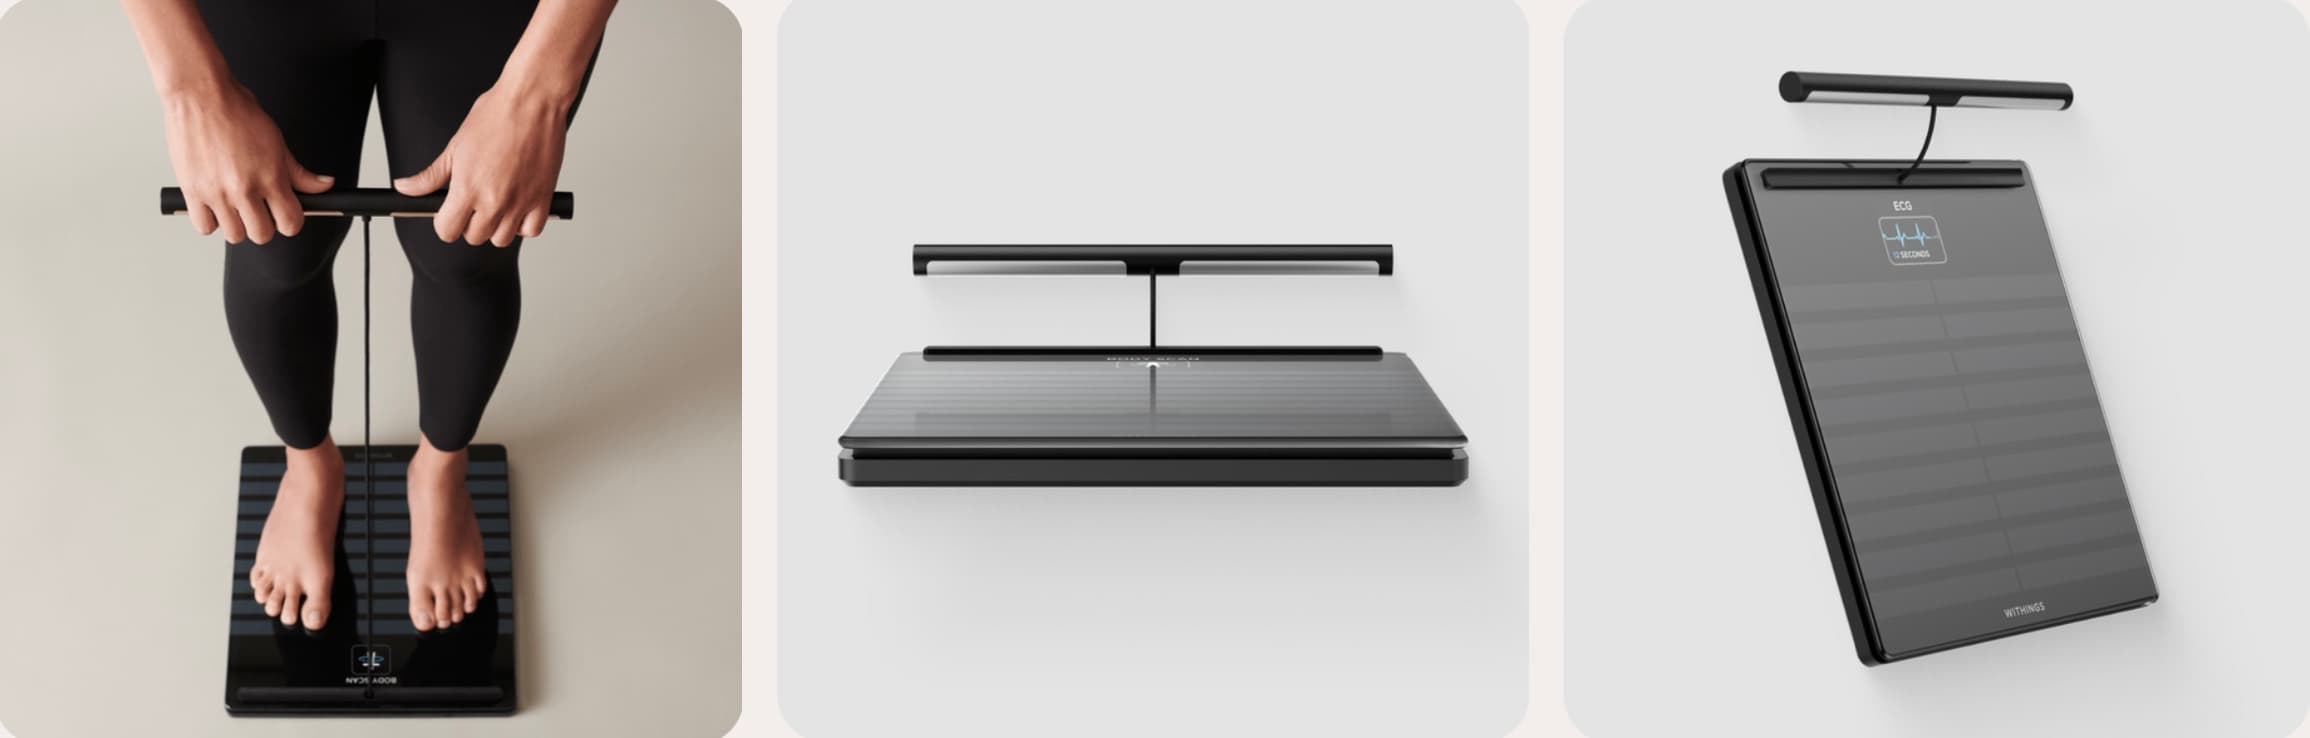 Withings launches Body Scan, an impressive smart scale that also